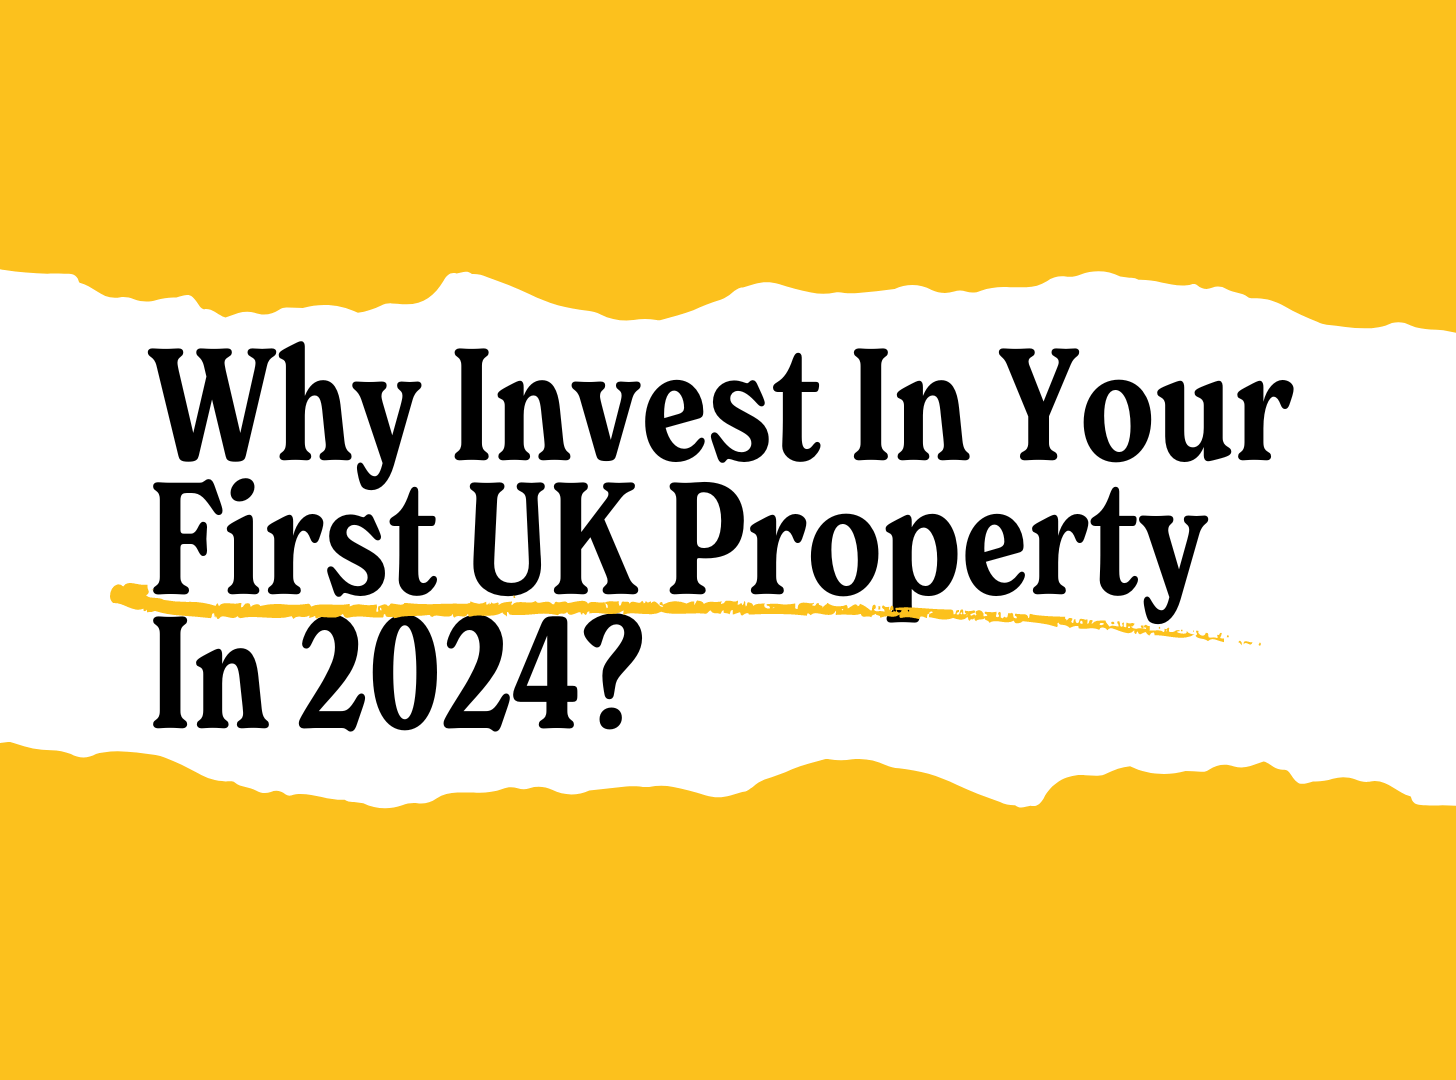 Why Invest In Your First UK Property In 2024?